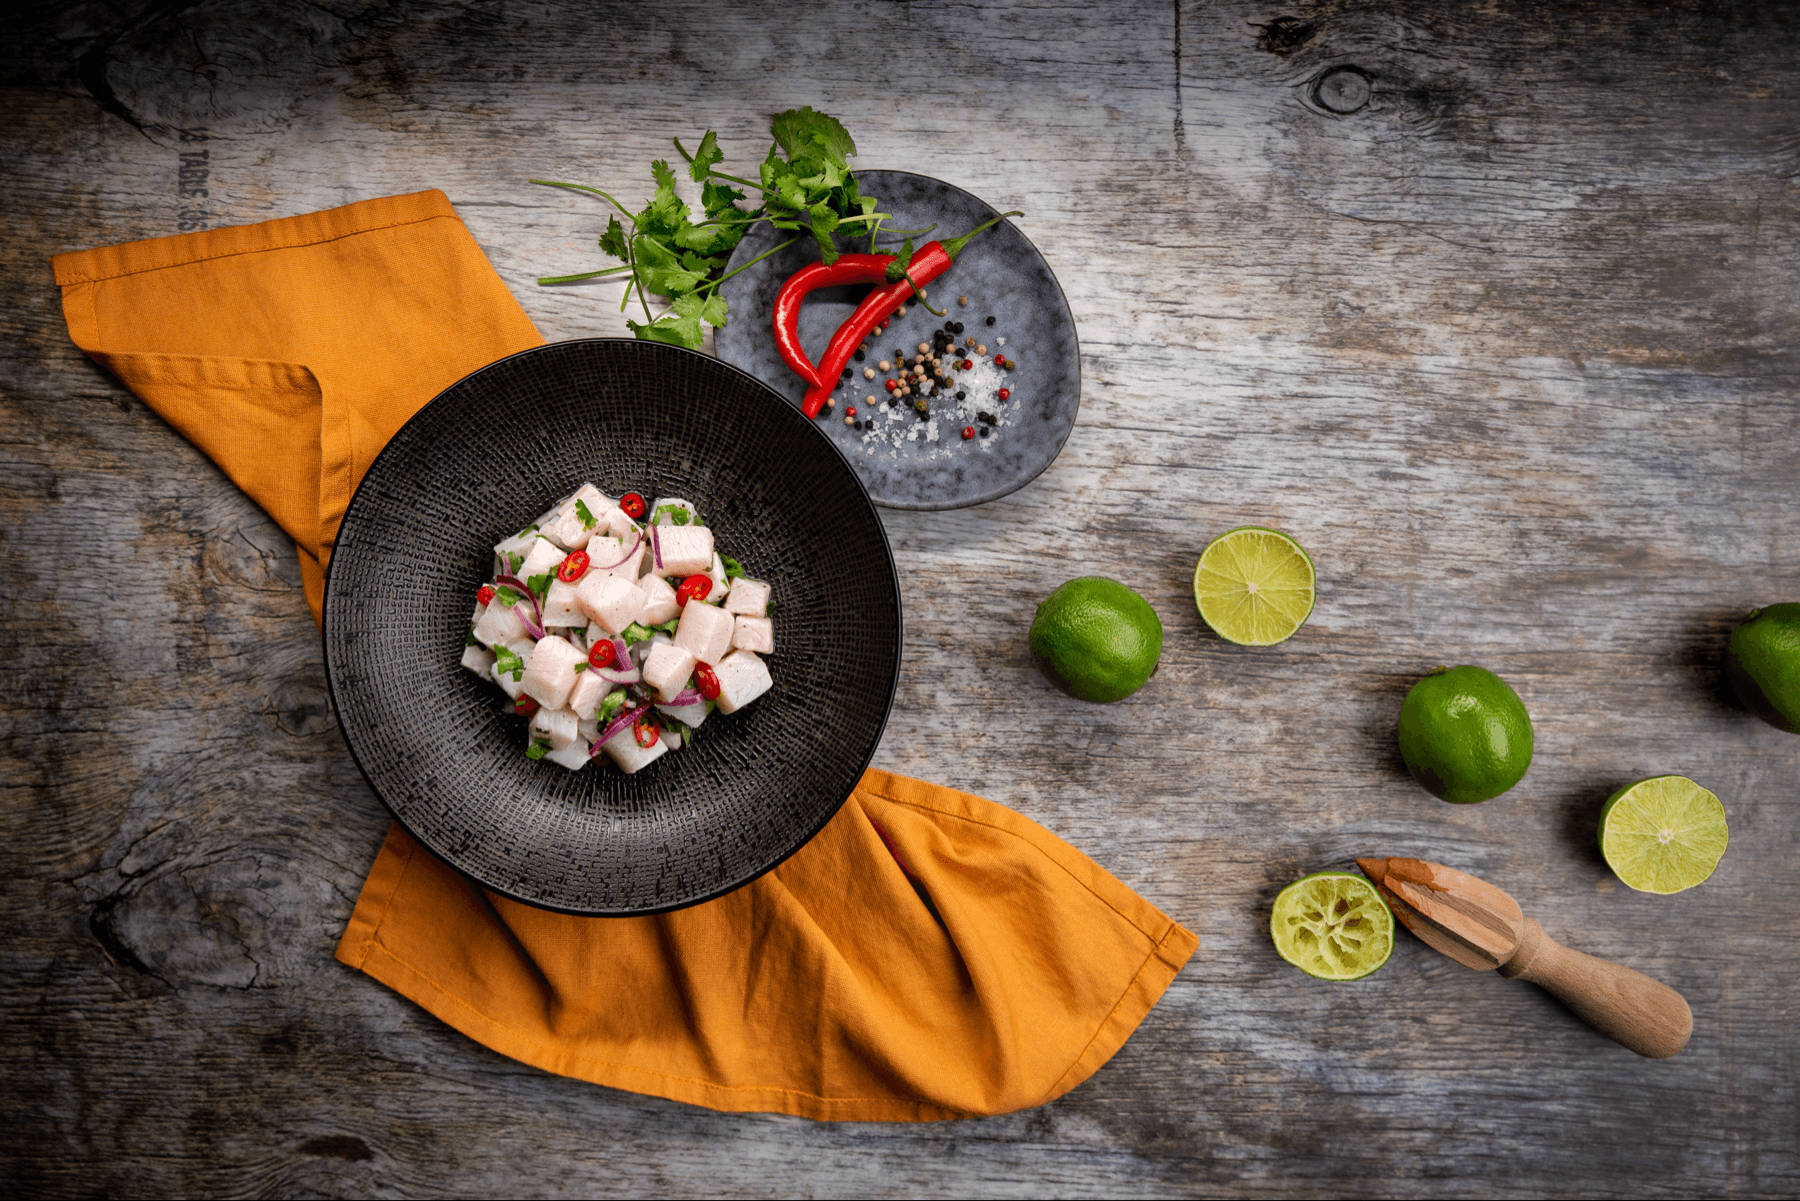 Exquisite Ceviche Garnished With Chilies Wallpaper